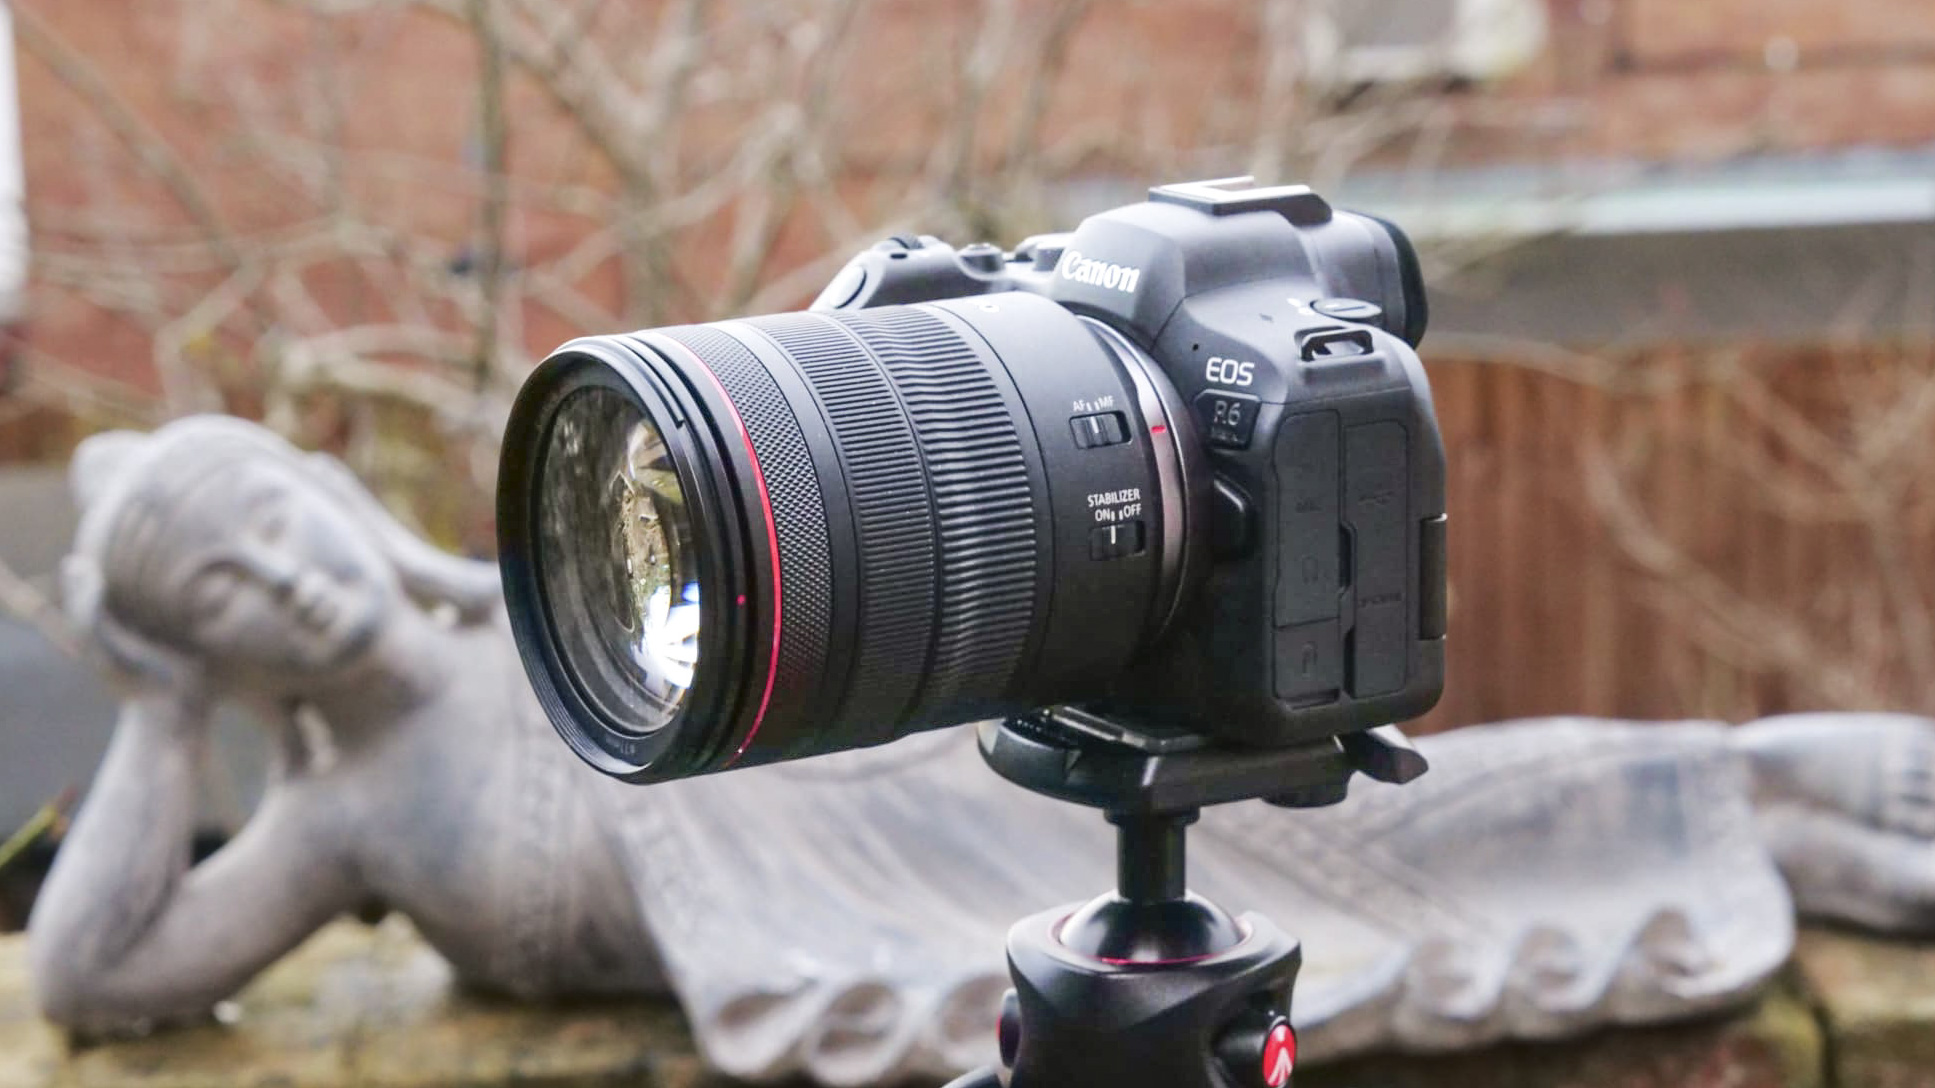 Canon EOS R6 II outside on a tripod with 24-105mm lens attached